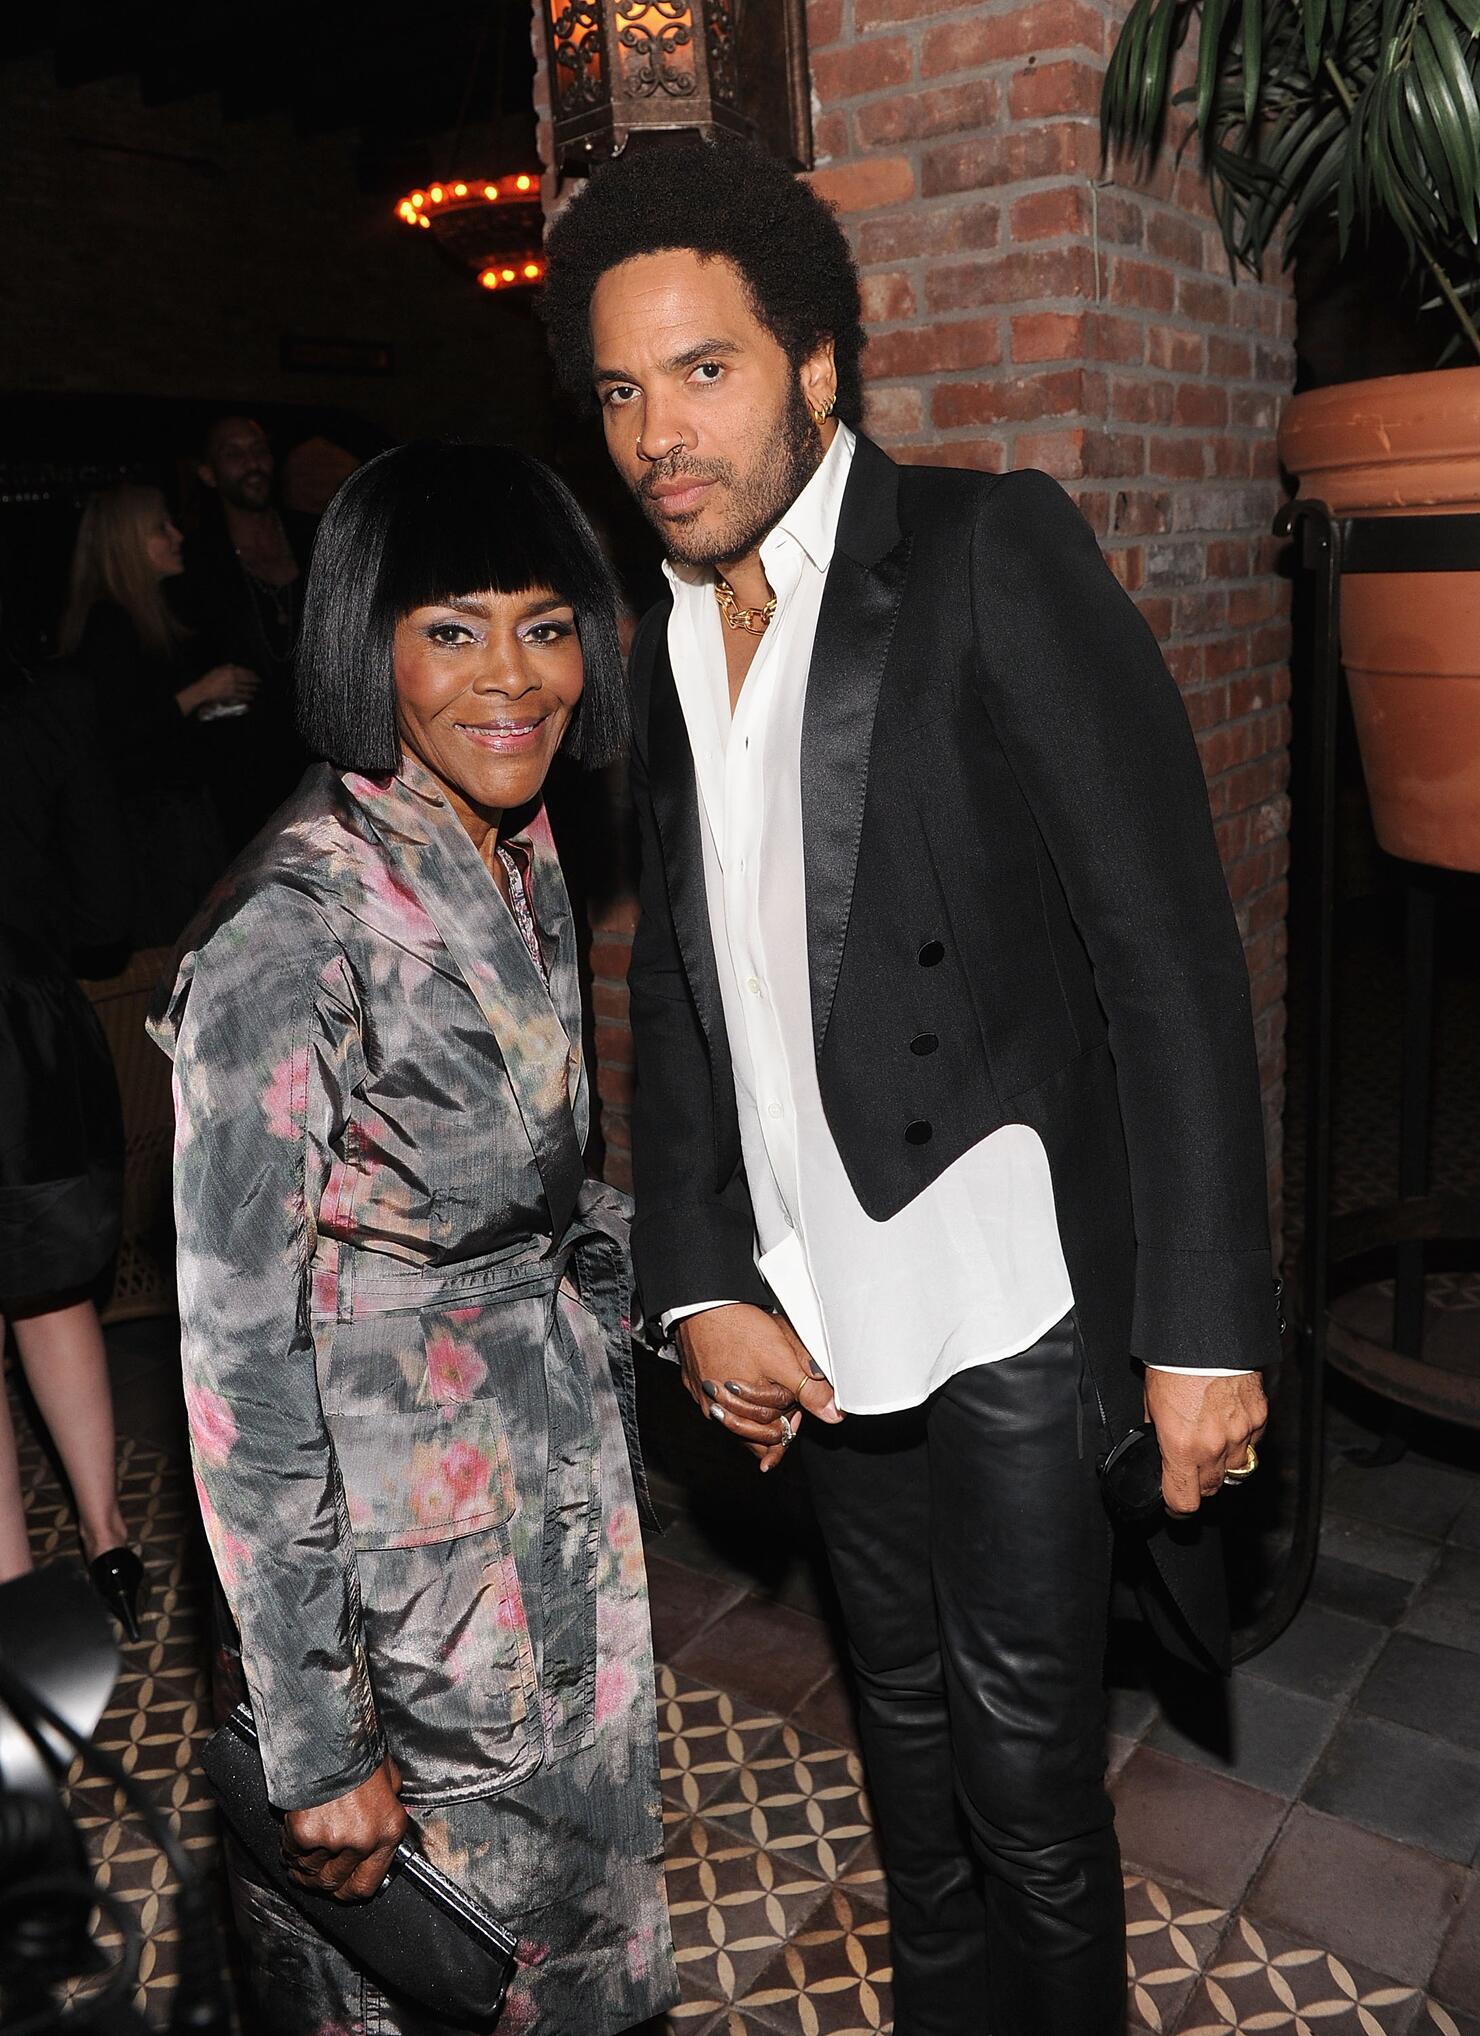 Lee Daniels' "The Butler" New York Premiere - After Party